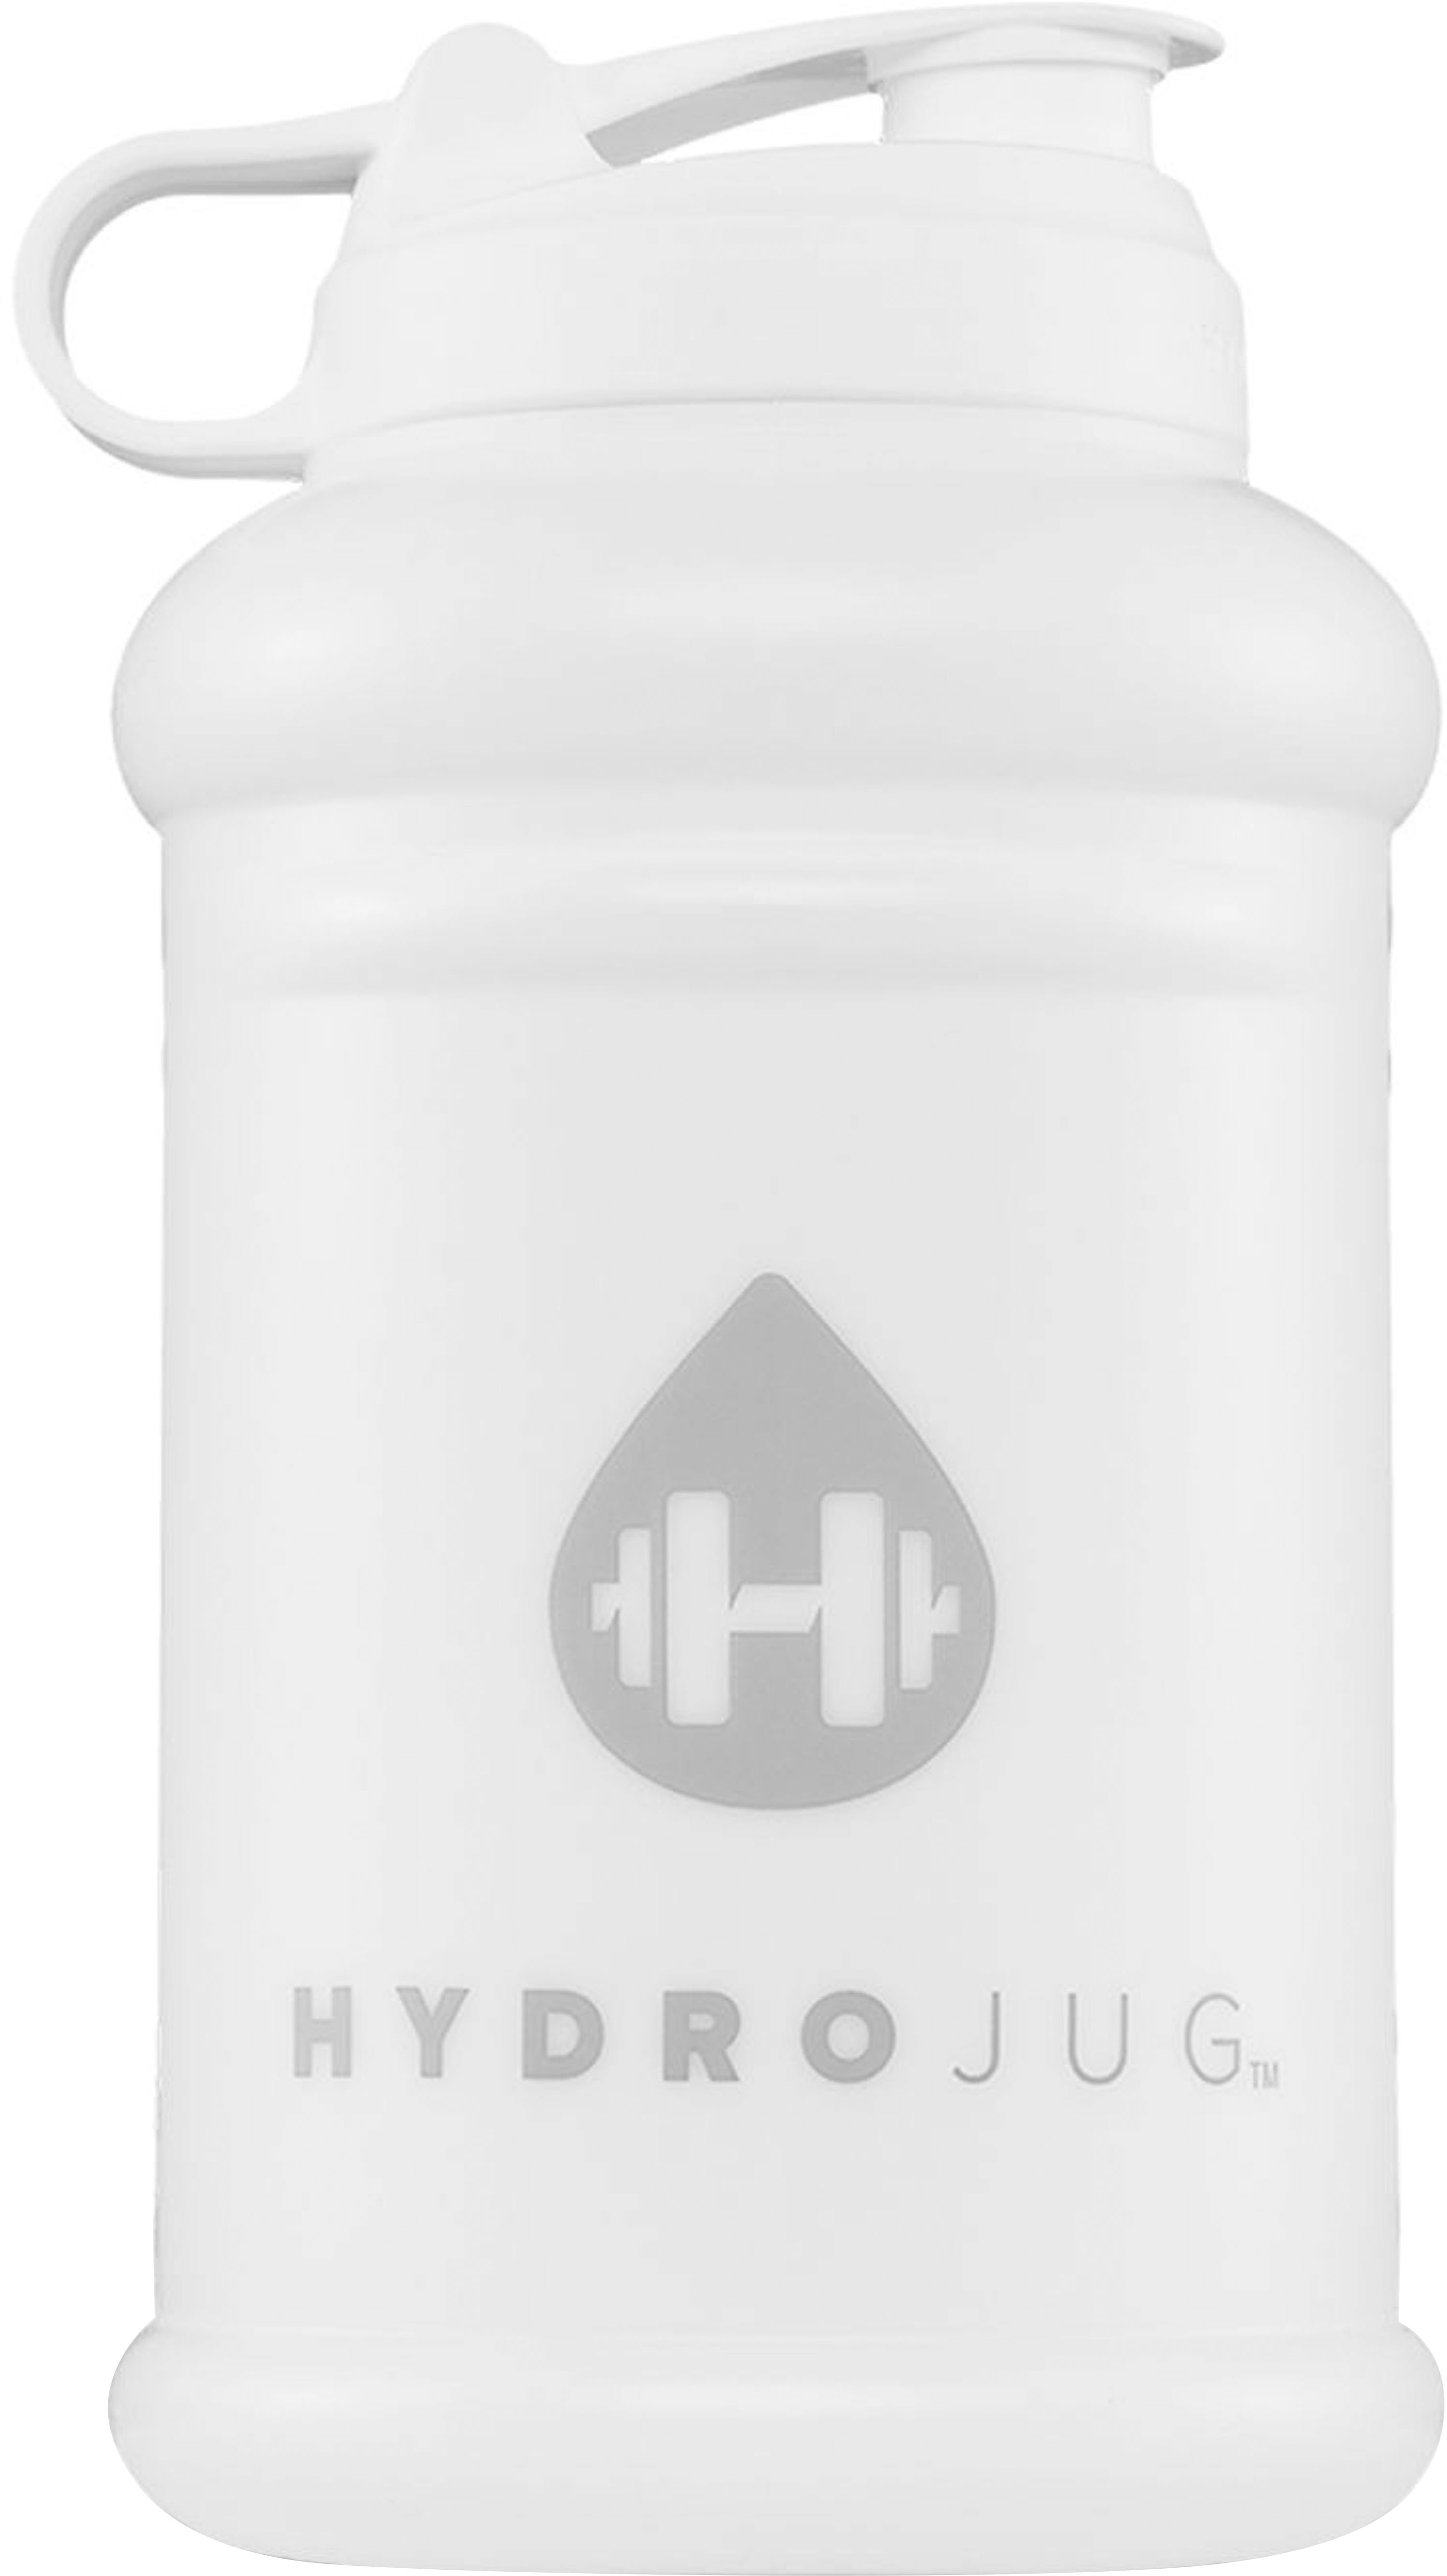 What Is A Tumbler? - HydroJug